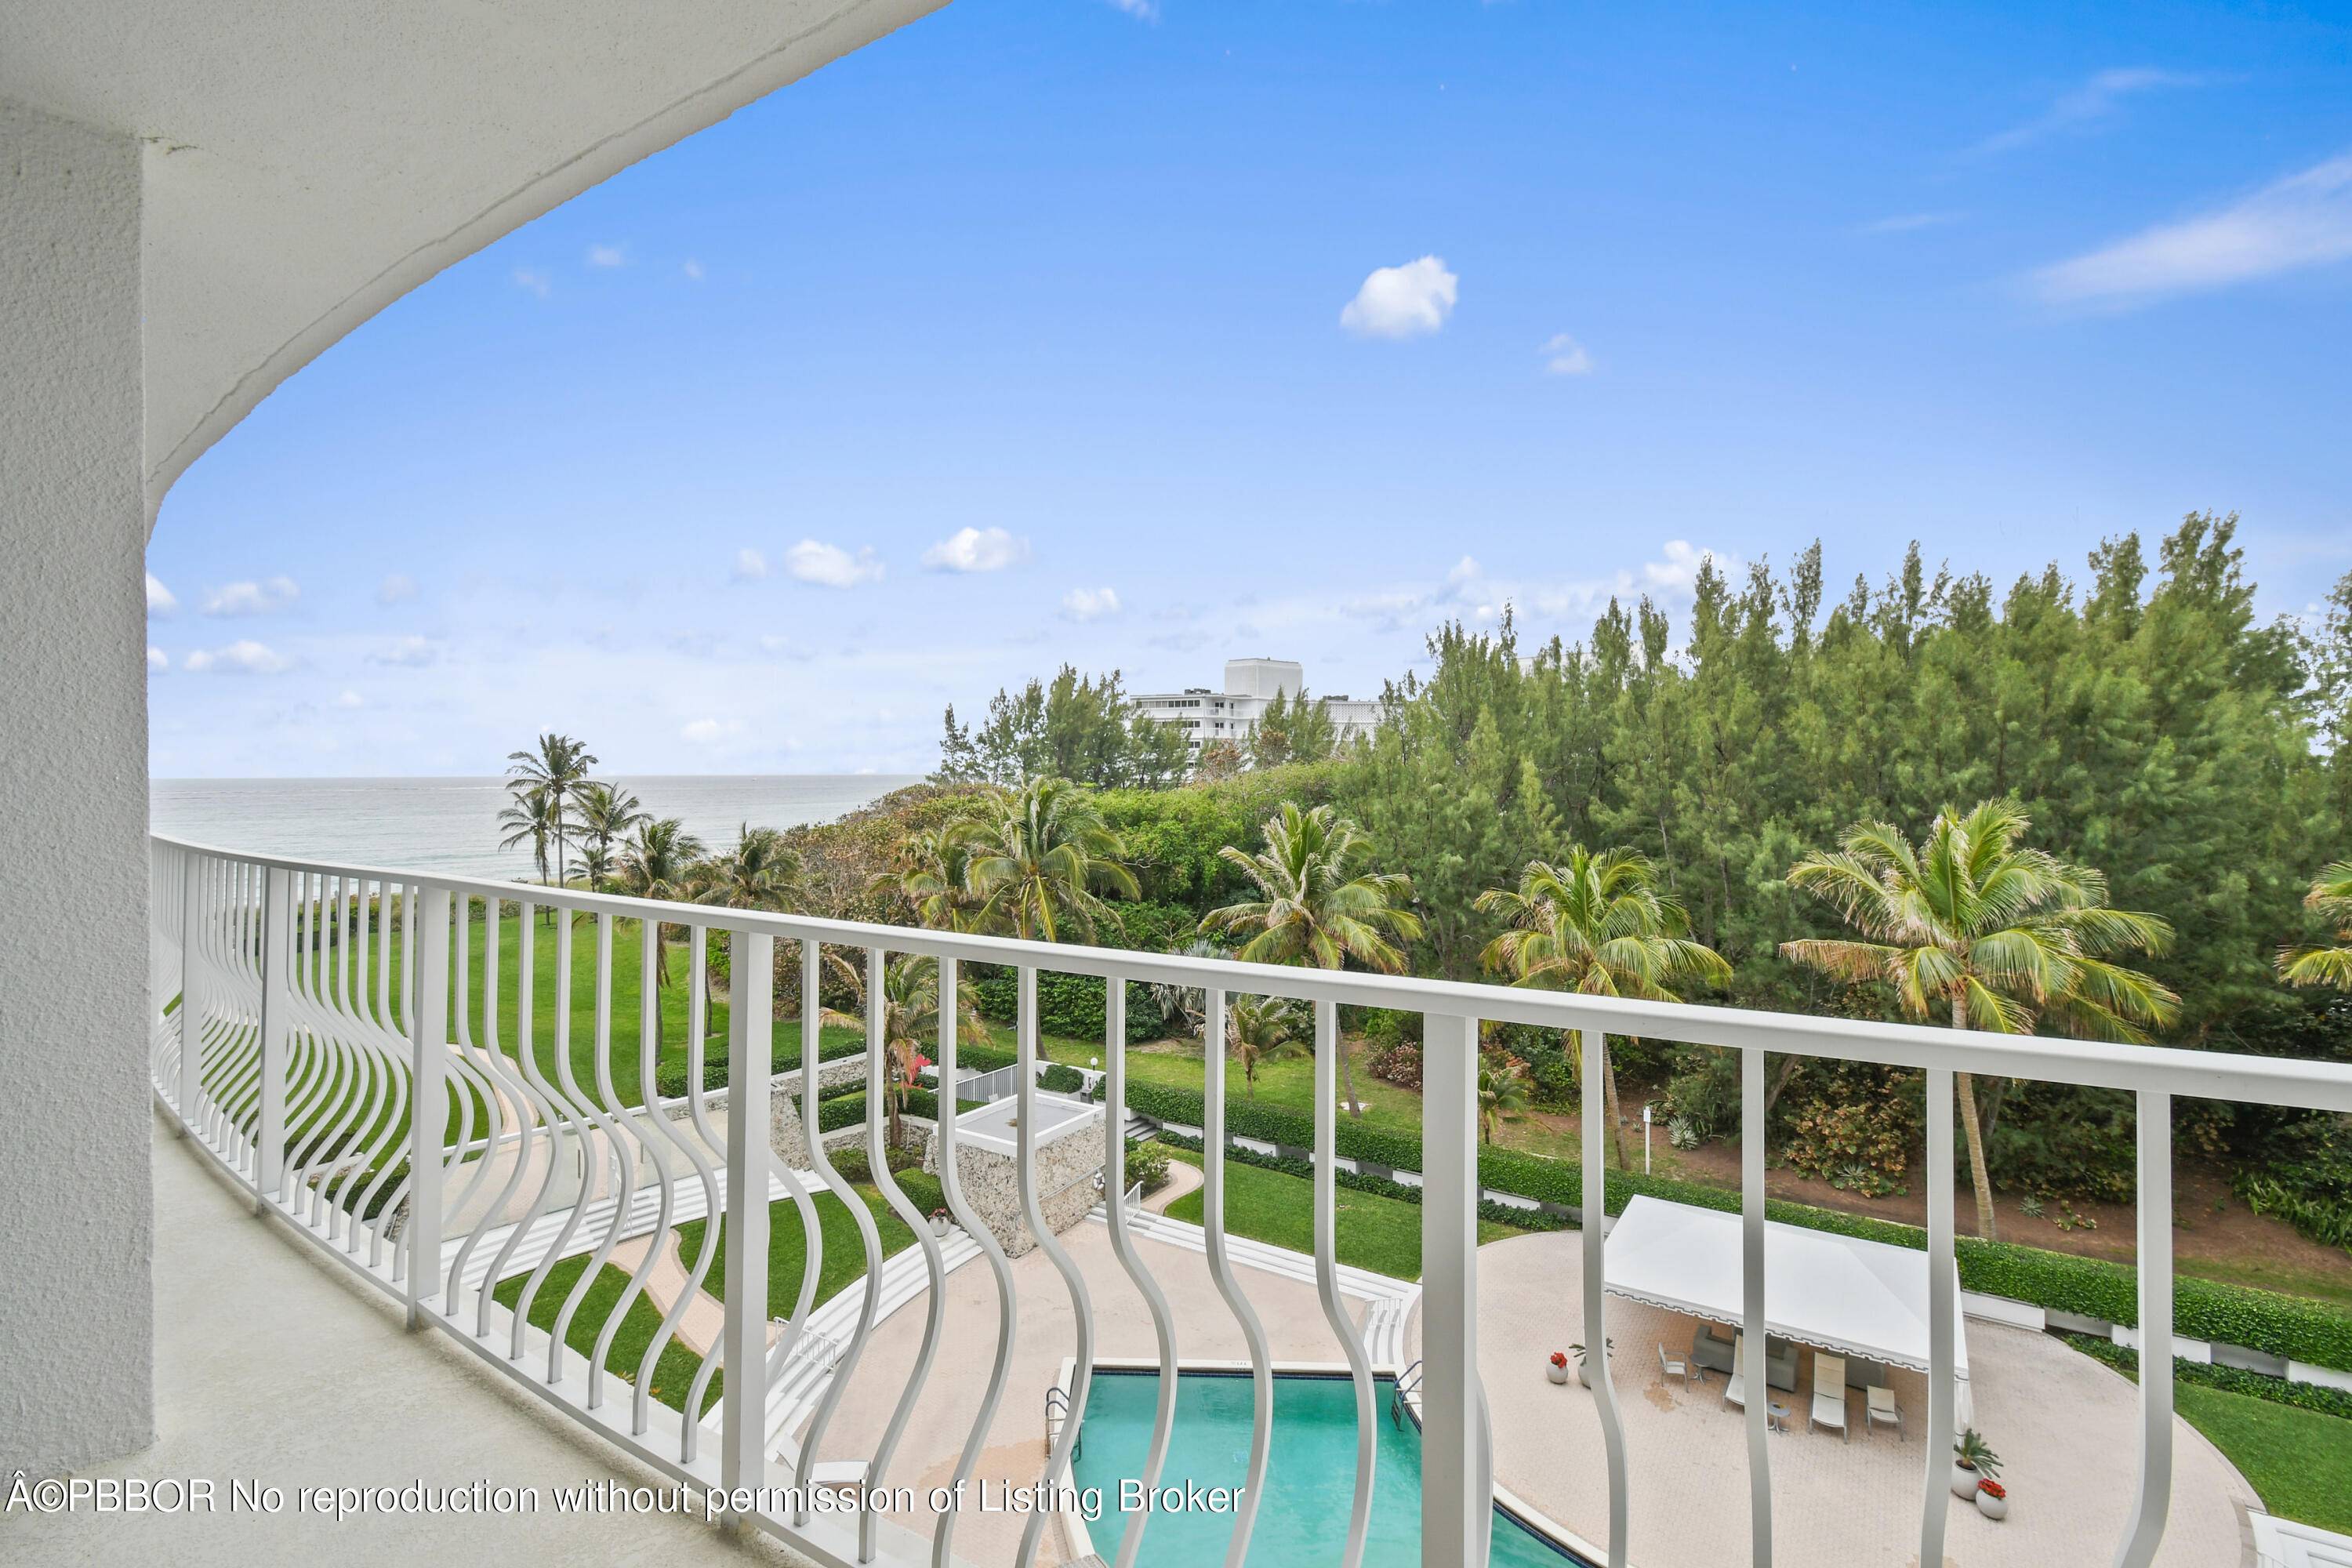 This apartment features beautiful views of the ocean, its owned green space across is breathtakingly beautiful.